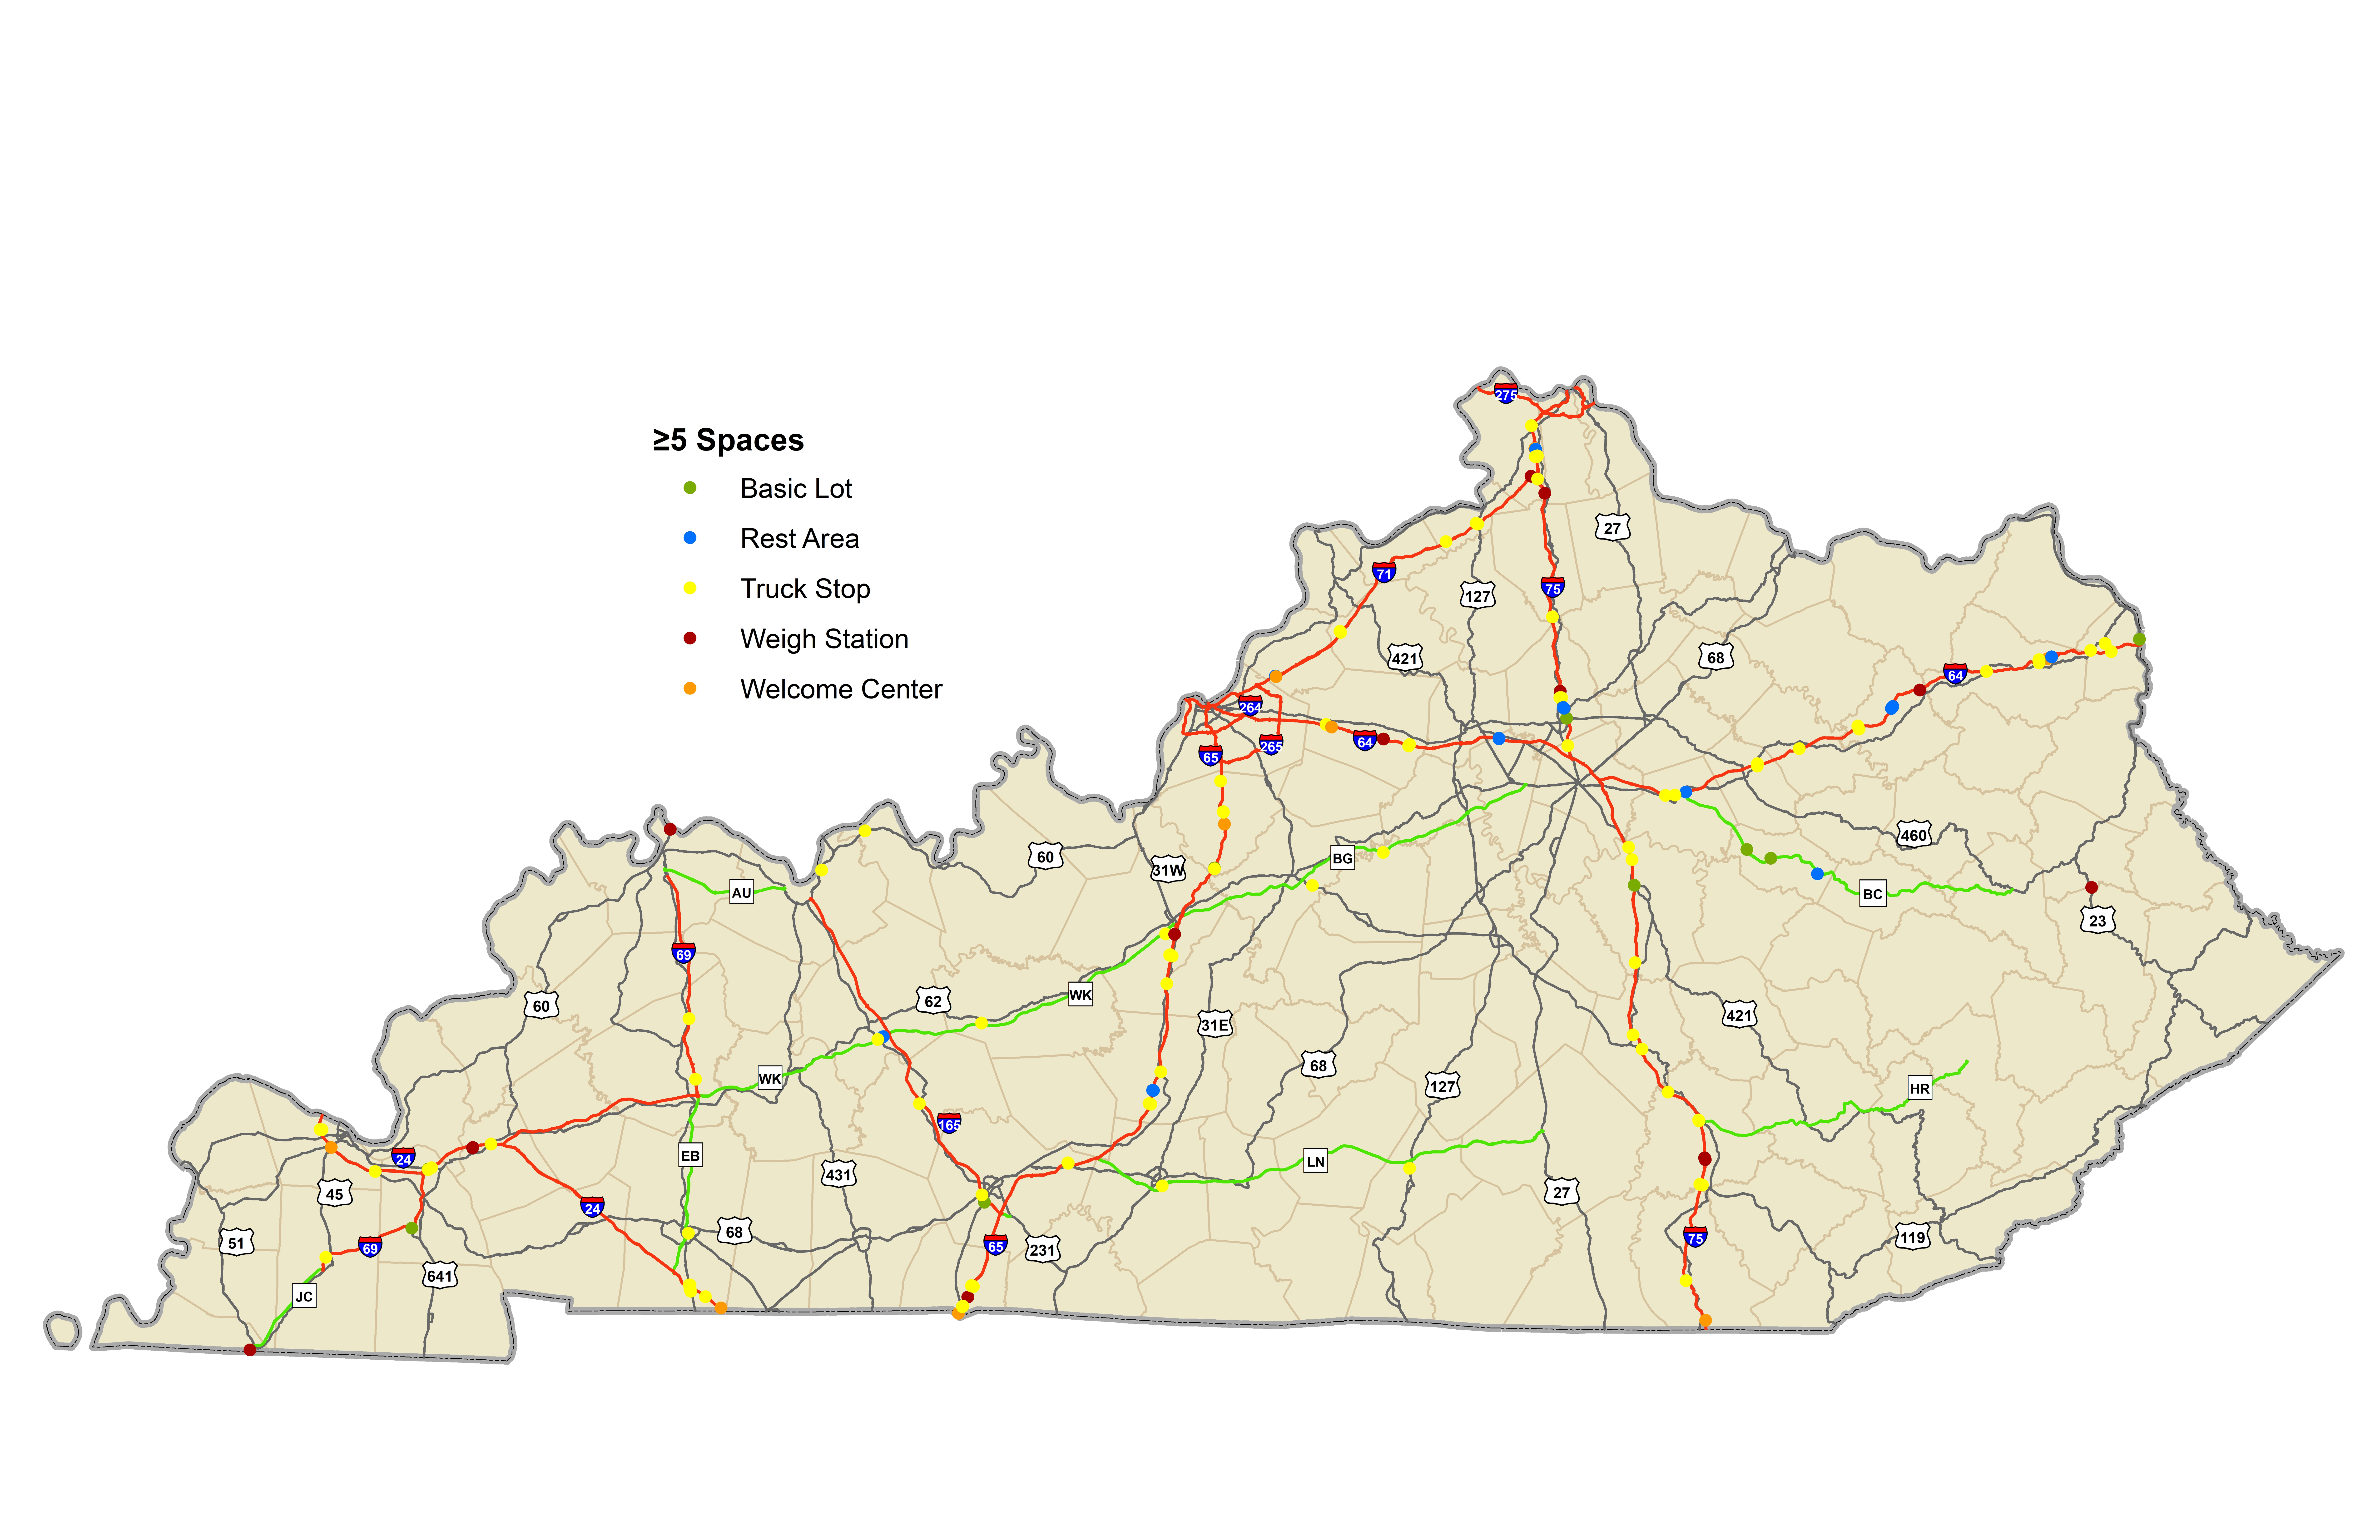 Statewide map of Kentucky showing truck parking locations along major roadways